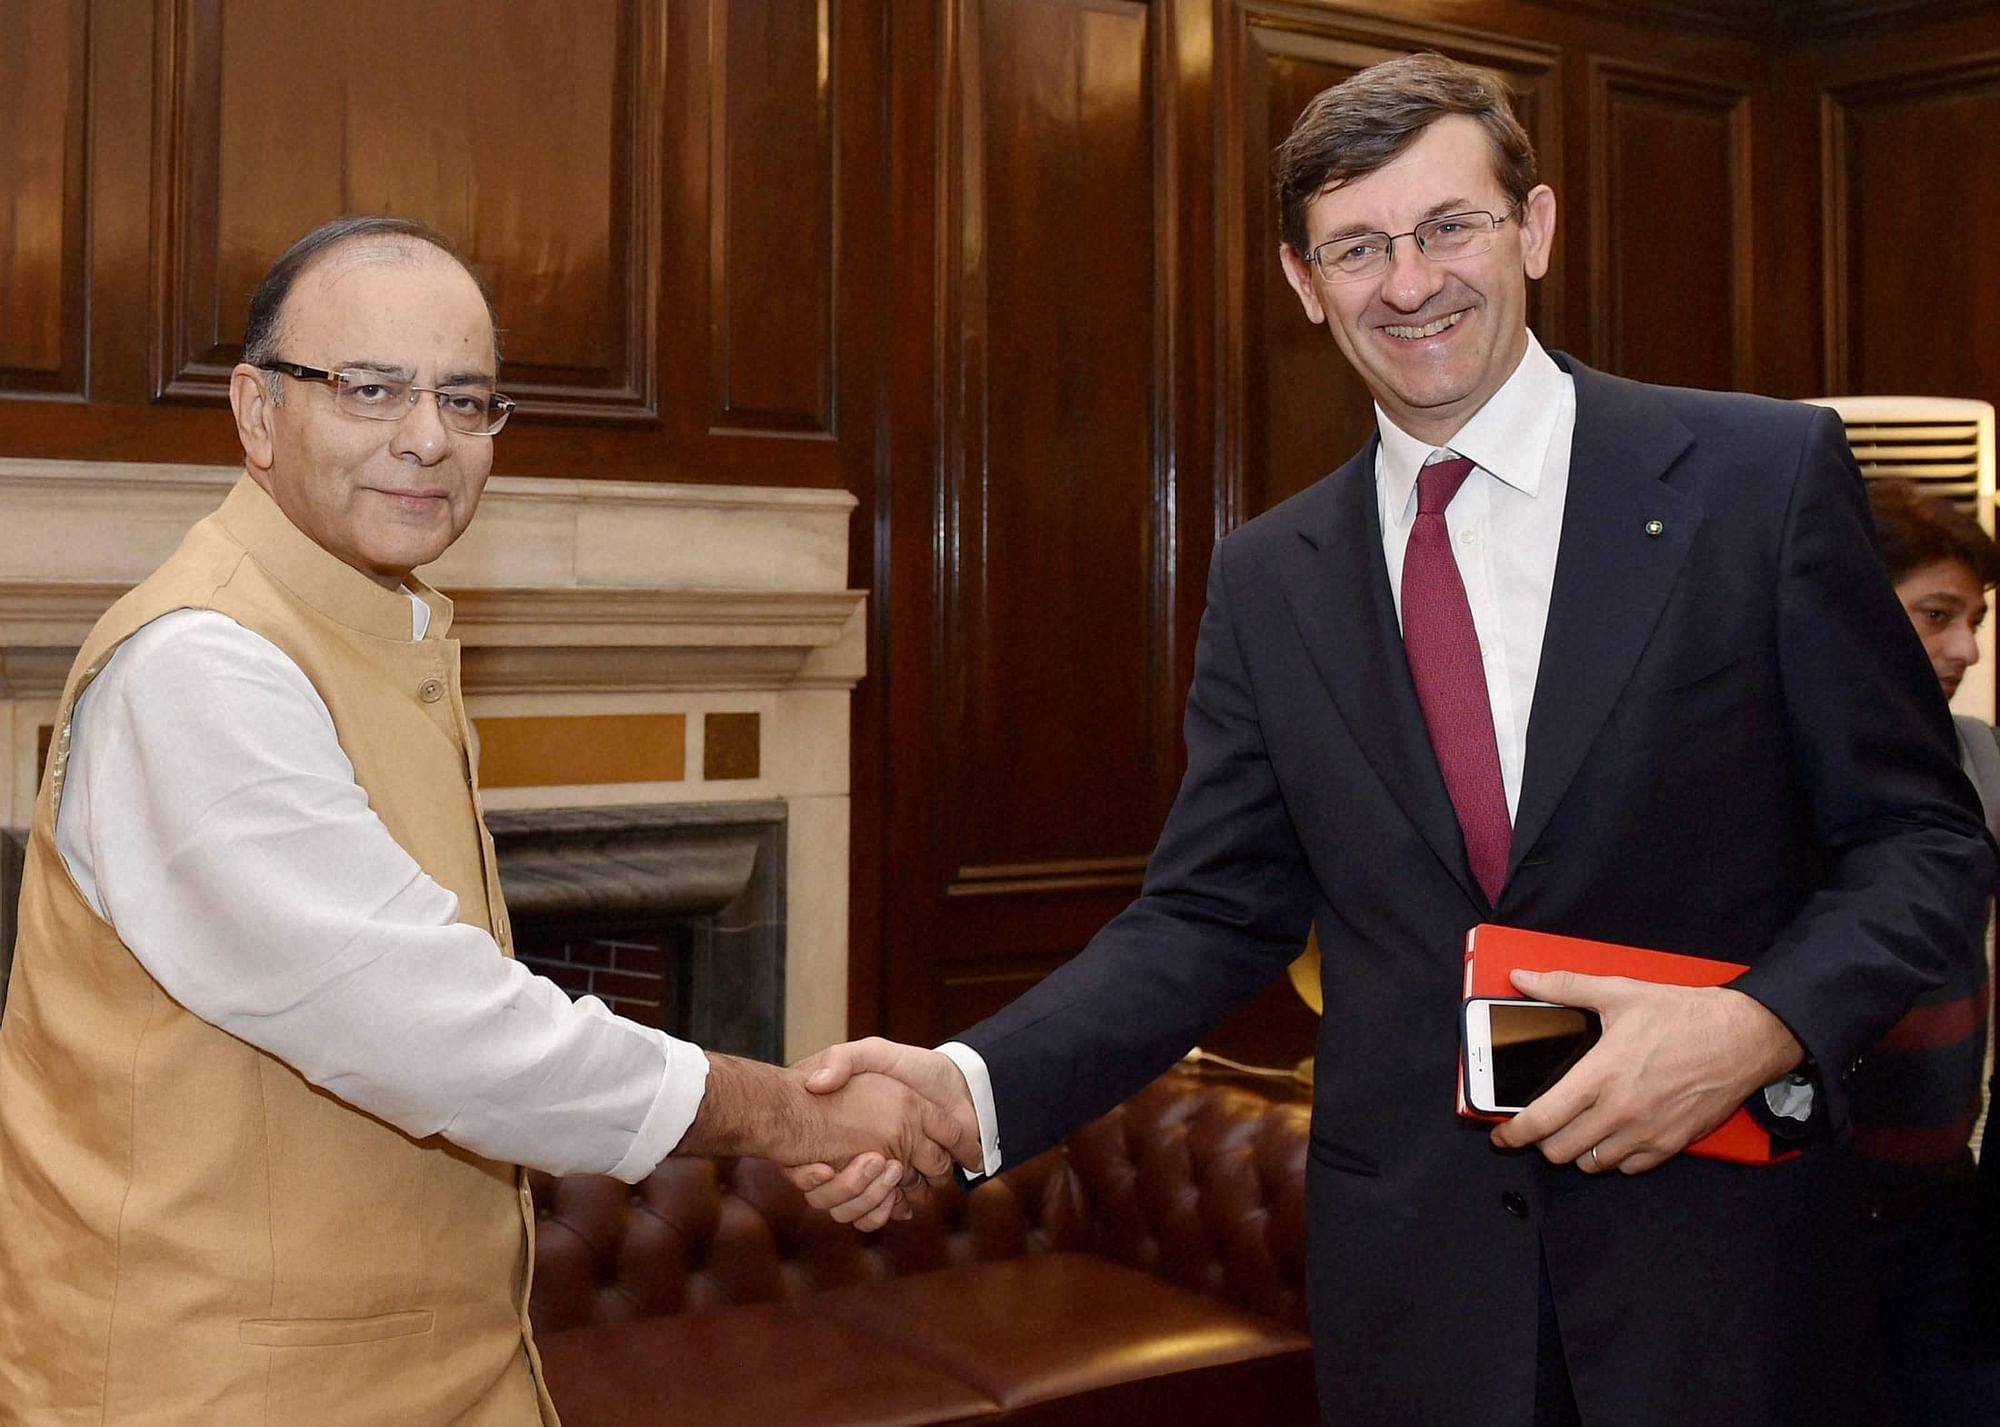 Union Minister for Finance, Corporate Affairs and Information &amp; Broadcasting, Arun Jaitley shakes hand with Vodafone Group CEO Vittorio Colao during a meeting in New Delhi. (Photo: PTI) 